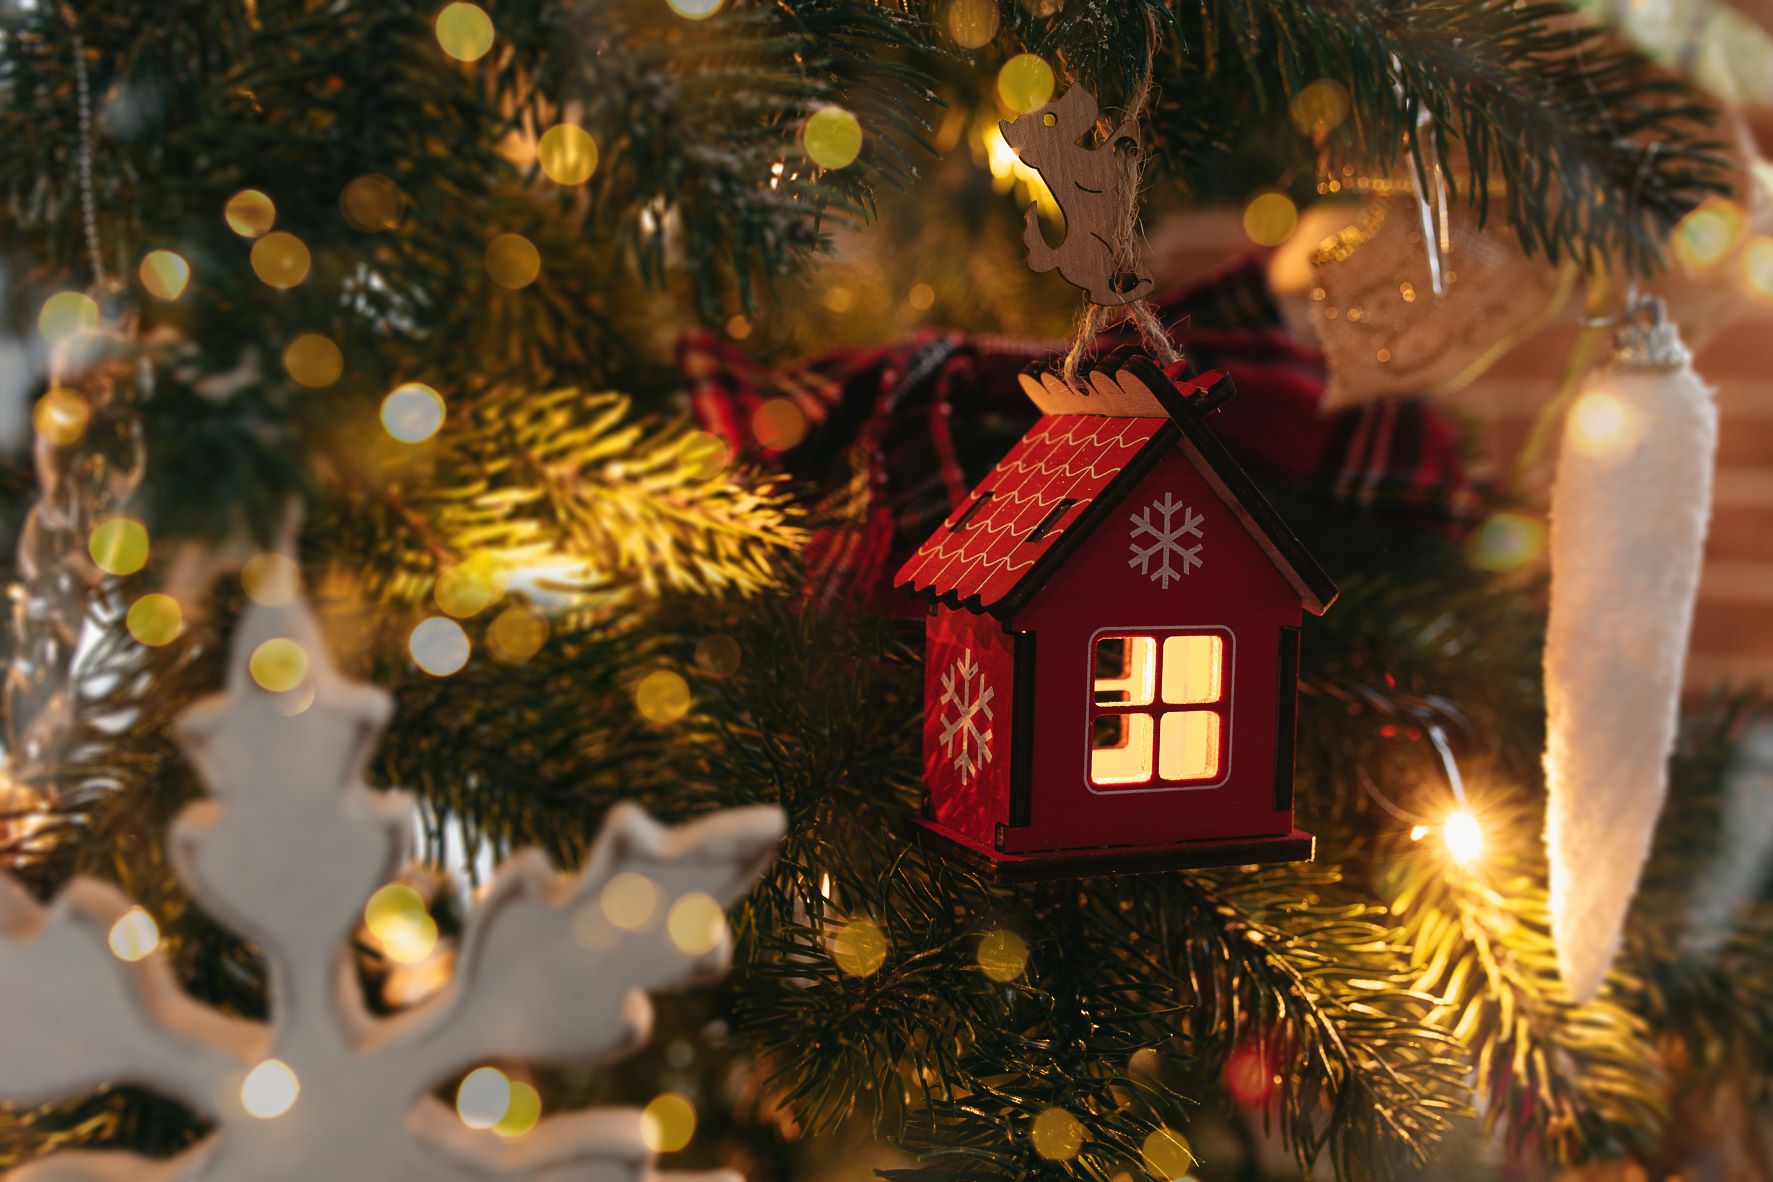 Christmas Decorating Ideas for a Home You Own Vs a Rental - No1 Property Guide